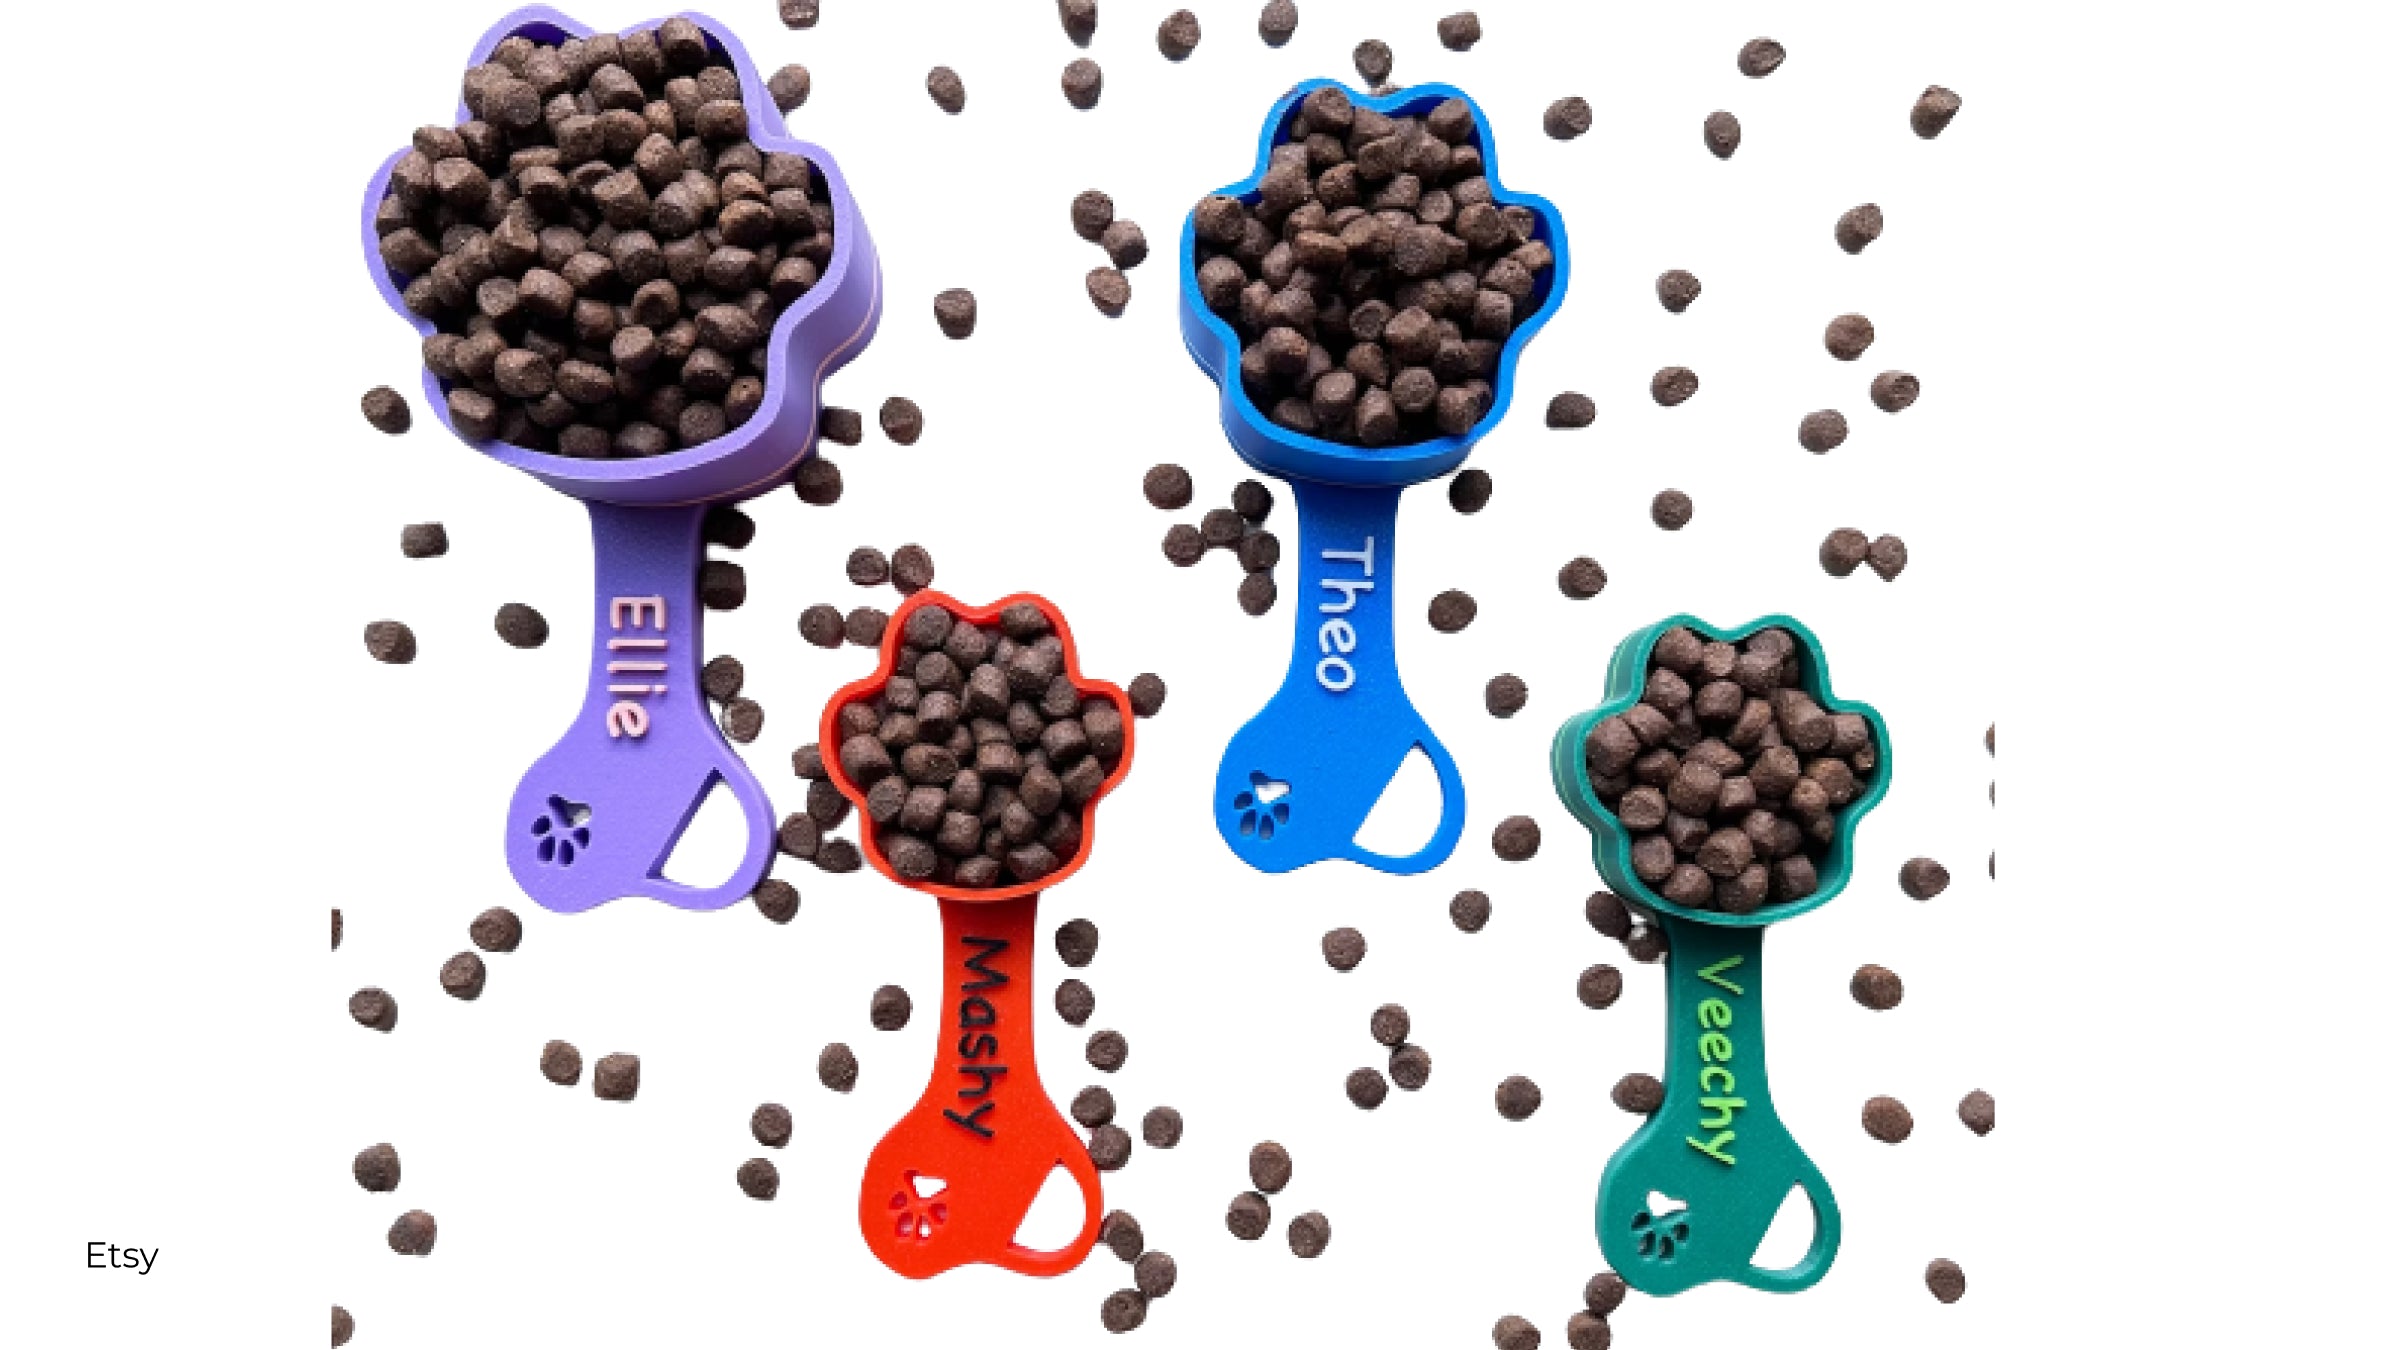 Personalized dog food scoops in various colors from Etsy